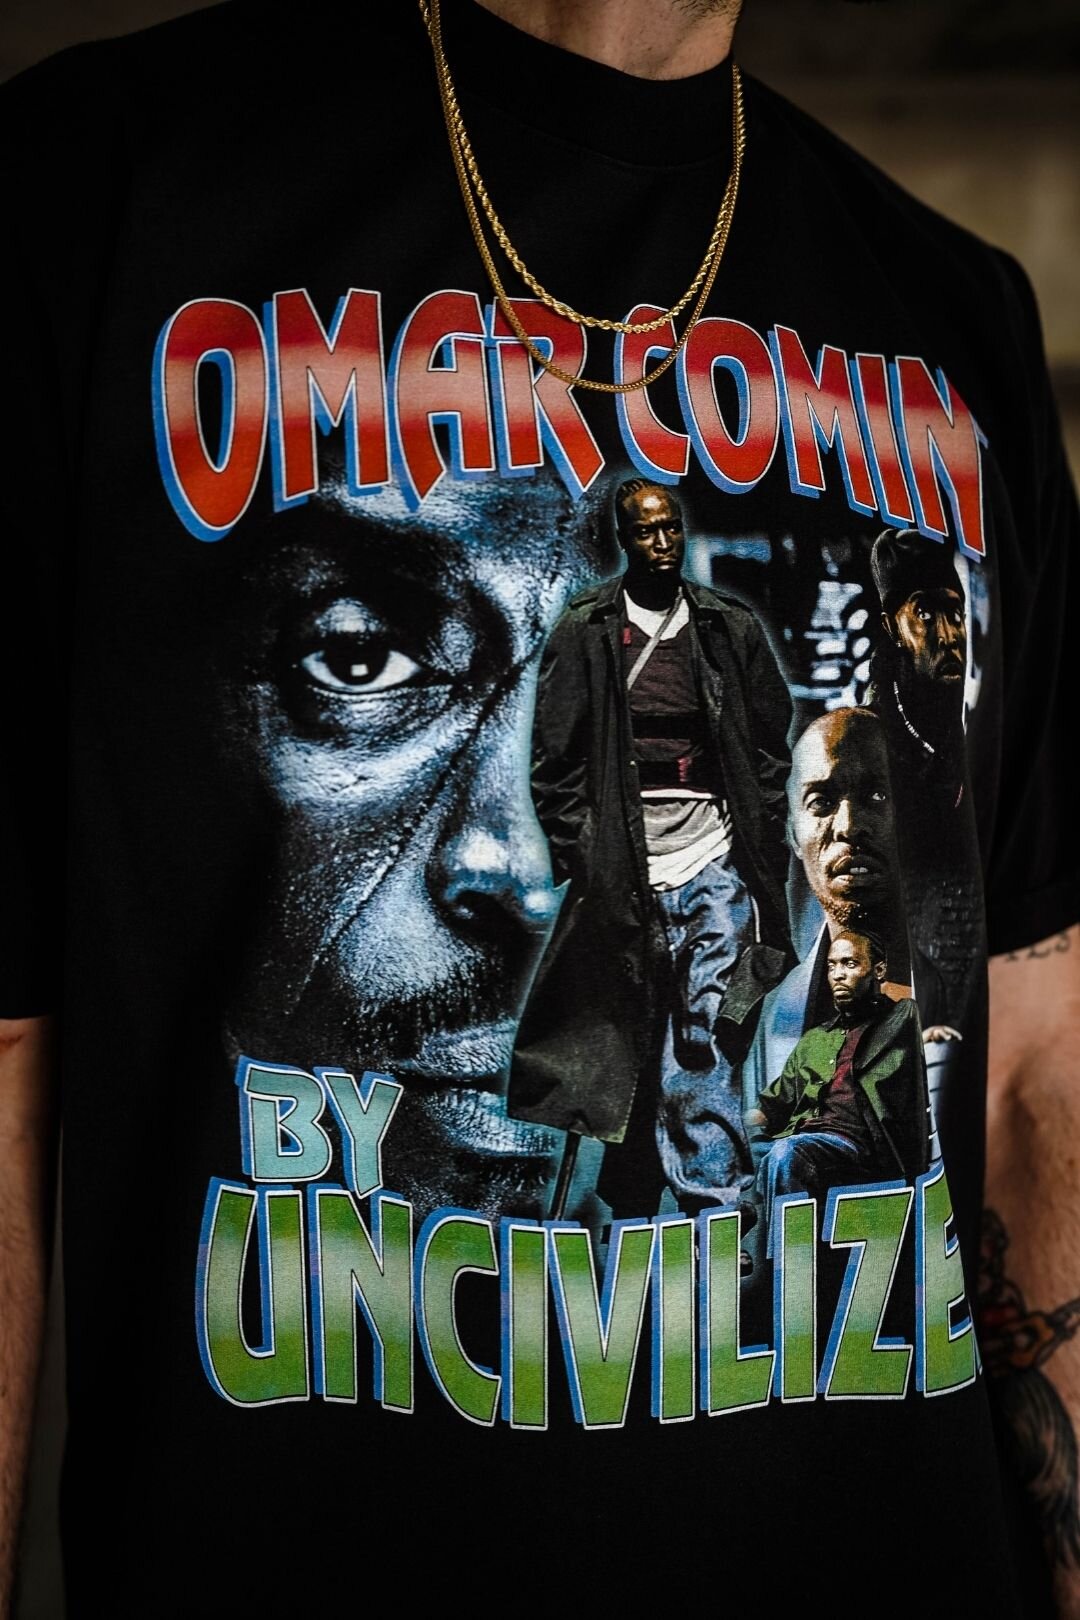 "OMAR COMIN'" T-SHIRT BY UNCIVILIZED